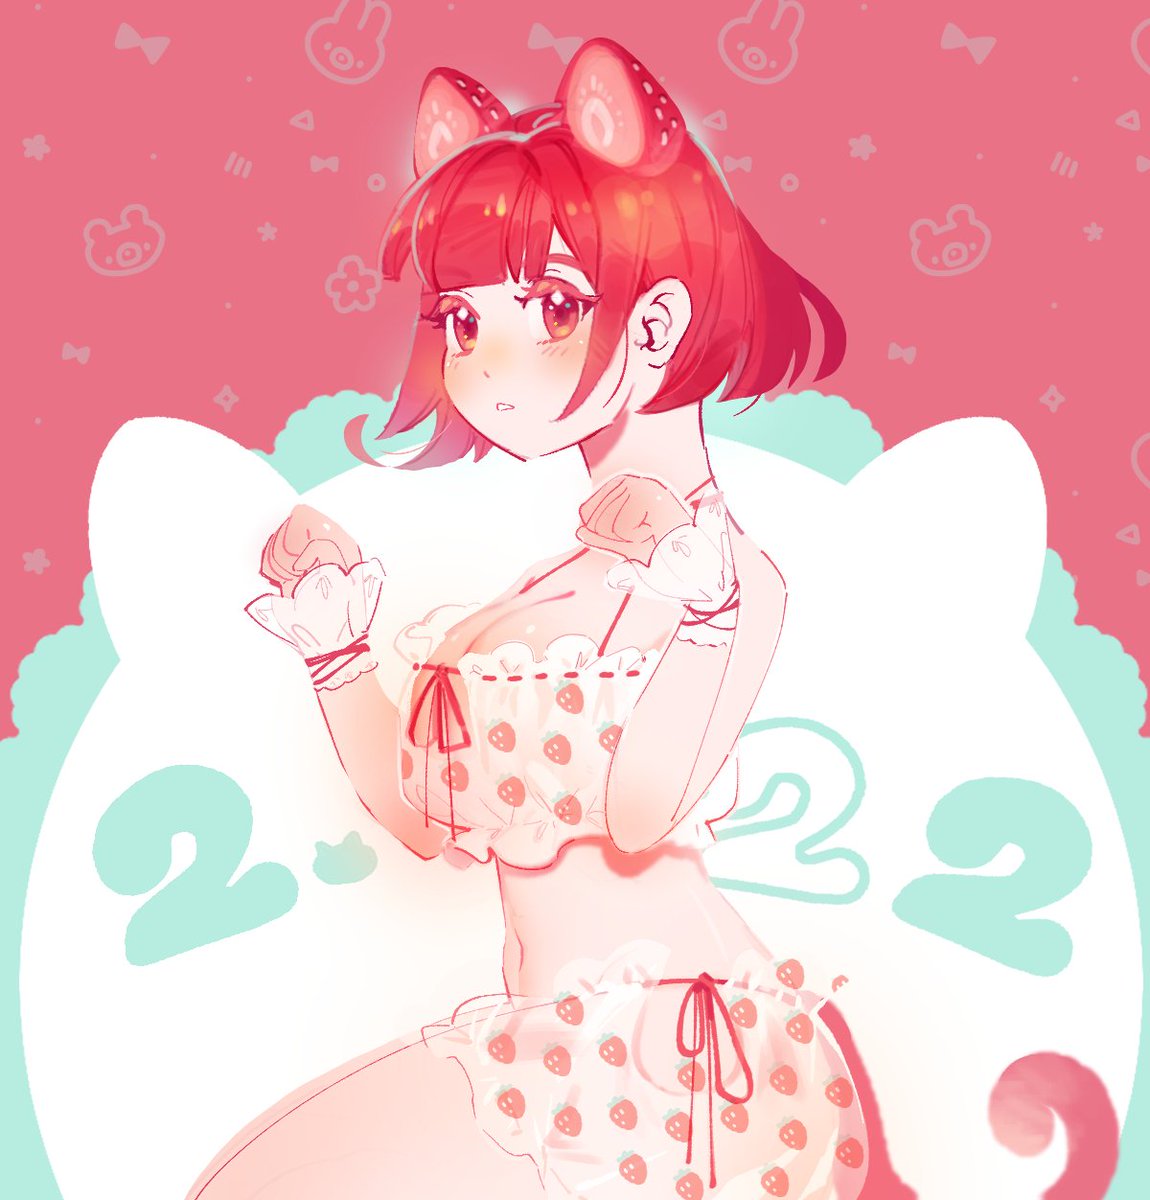 2.22 - back from the grave for cat day content! ฅ^•ﻌ•^ฅ kitty is punica - @lampzeni 🍓